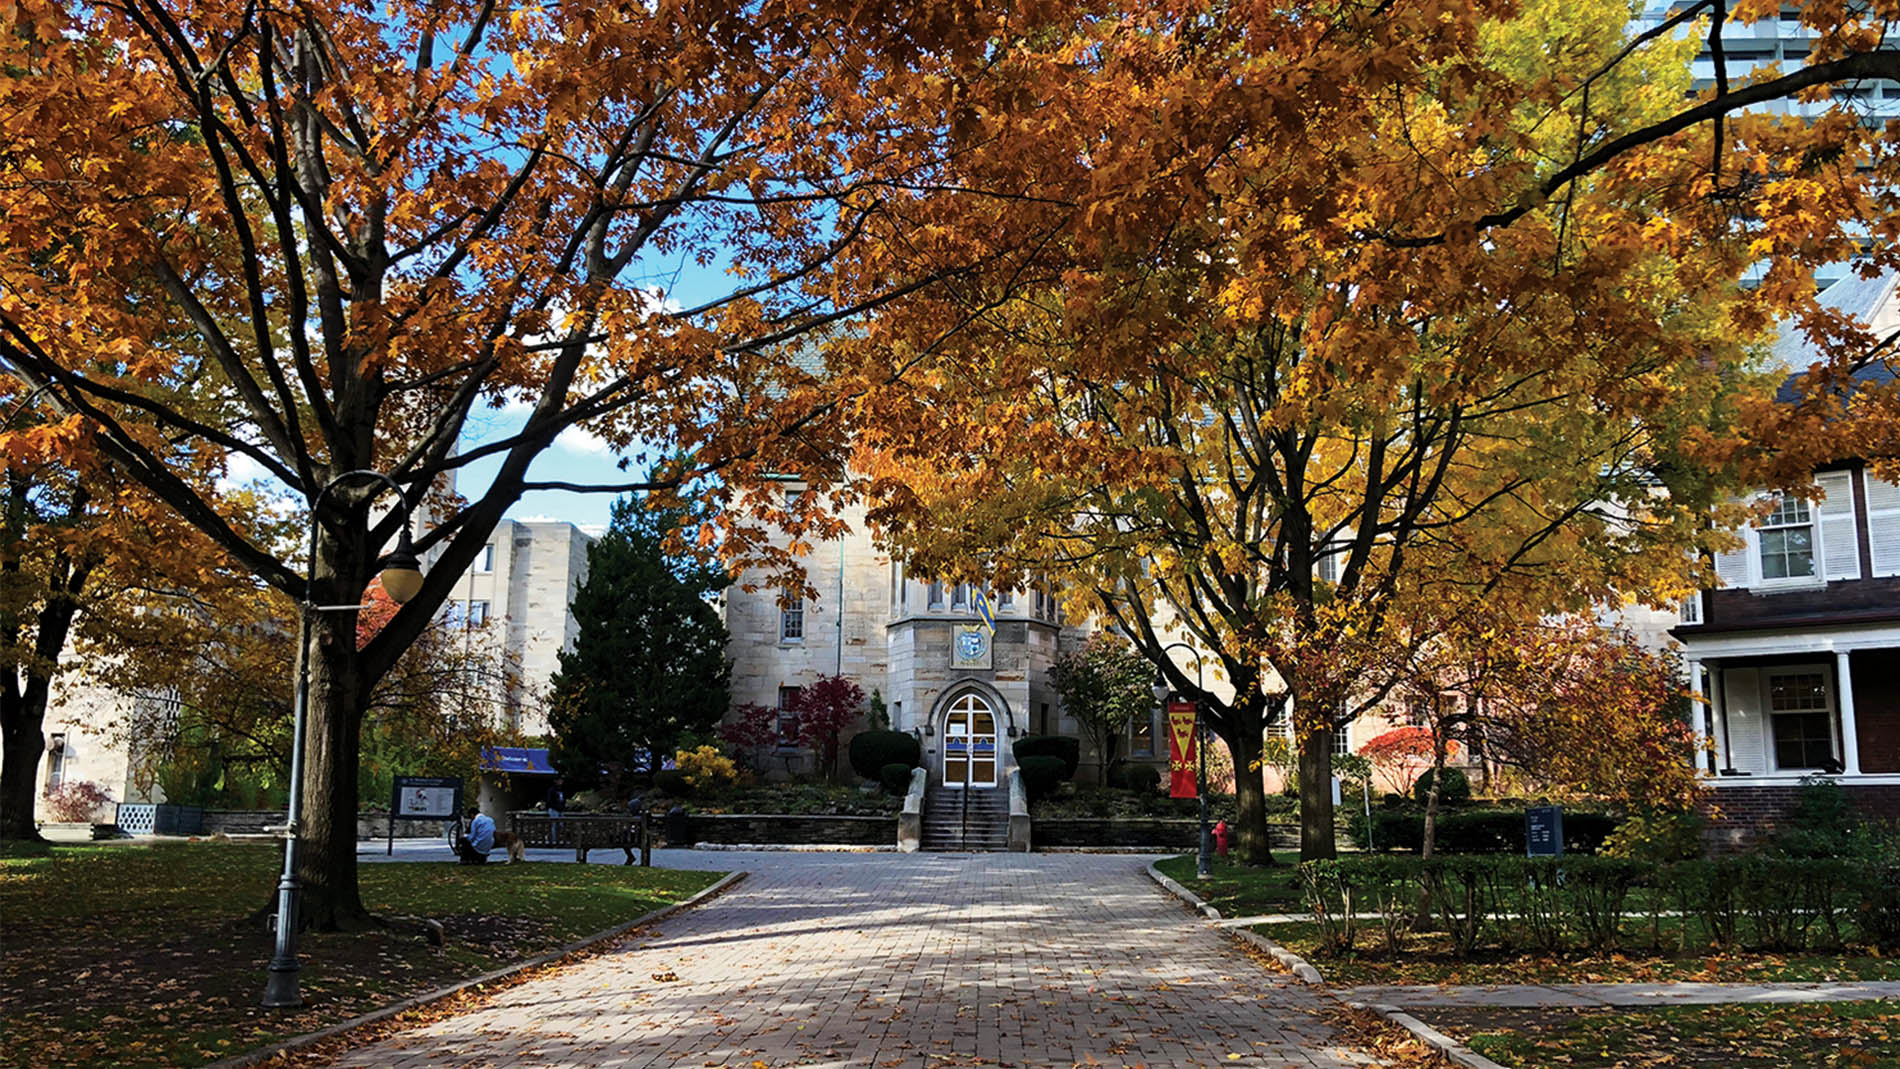 Photograph of Elmsley Place in the fall with orange and yellow leaves on the trees and Brennan Hall in the background